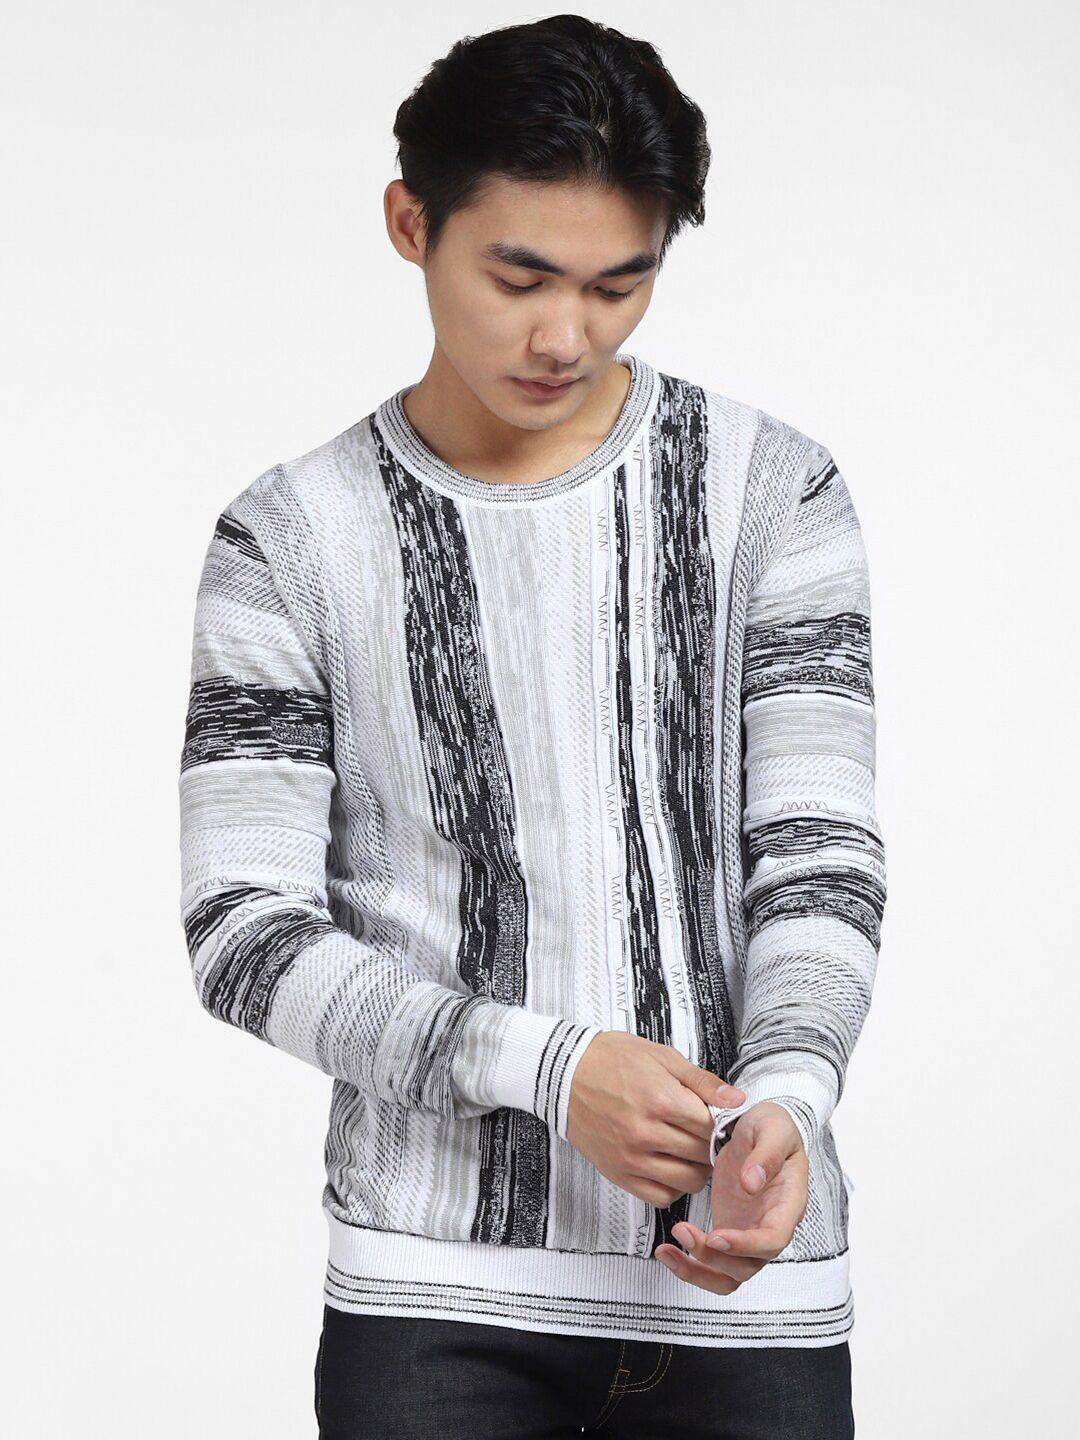 jack & jones men white & black abstract printed pullover cotton sweater